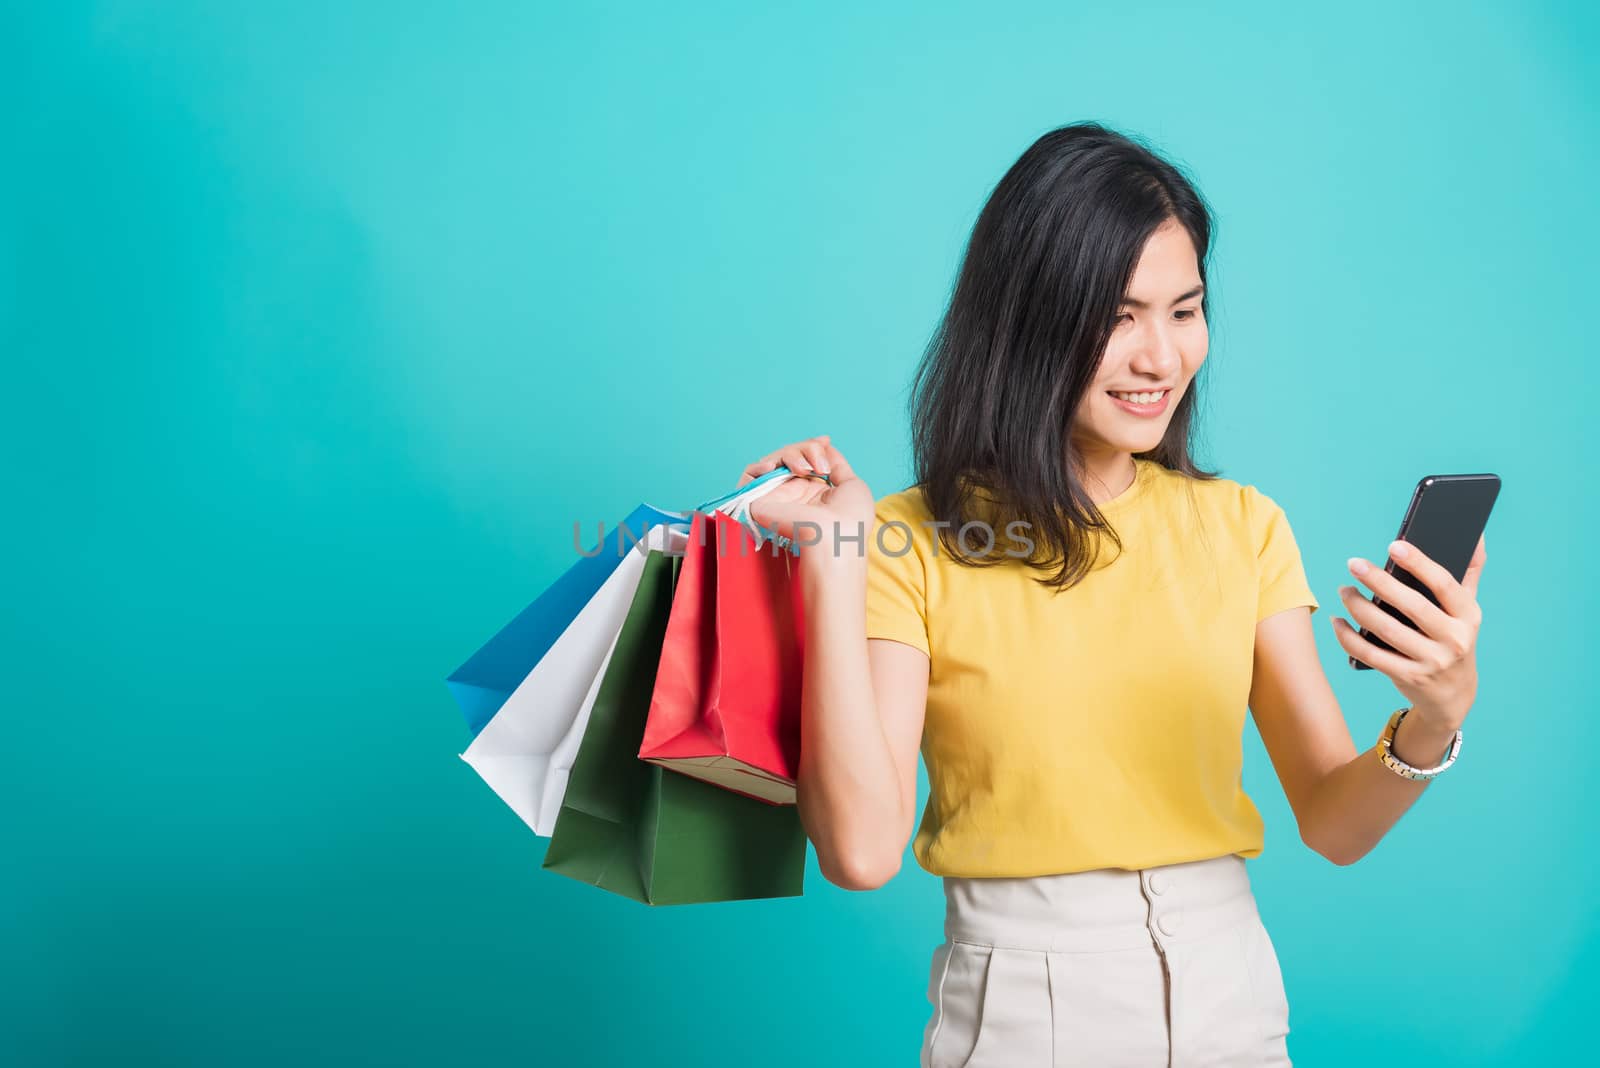 Portrait happy Asian beautiful young woman smile white teeth standing wear yellow t-shirt, She holding shopping bags and using a mobile phone, studio shot on blue background with copy space for text